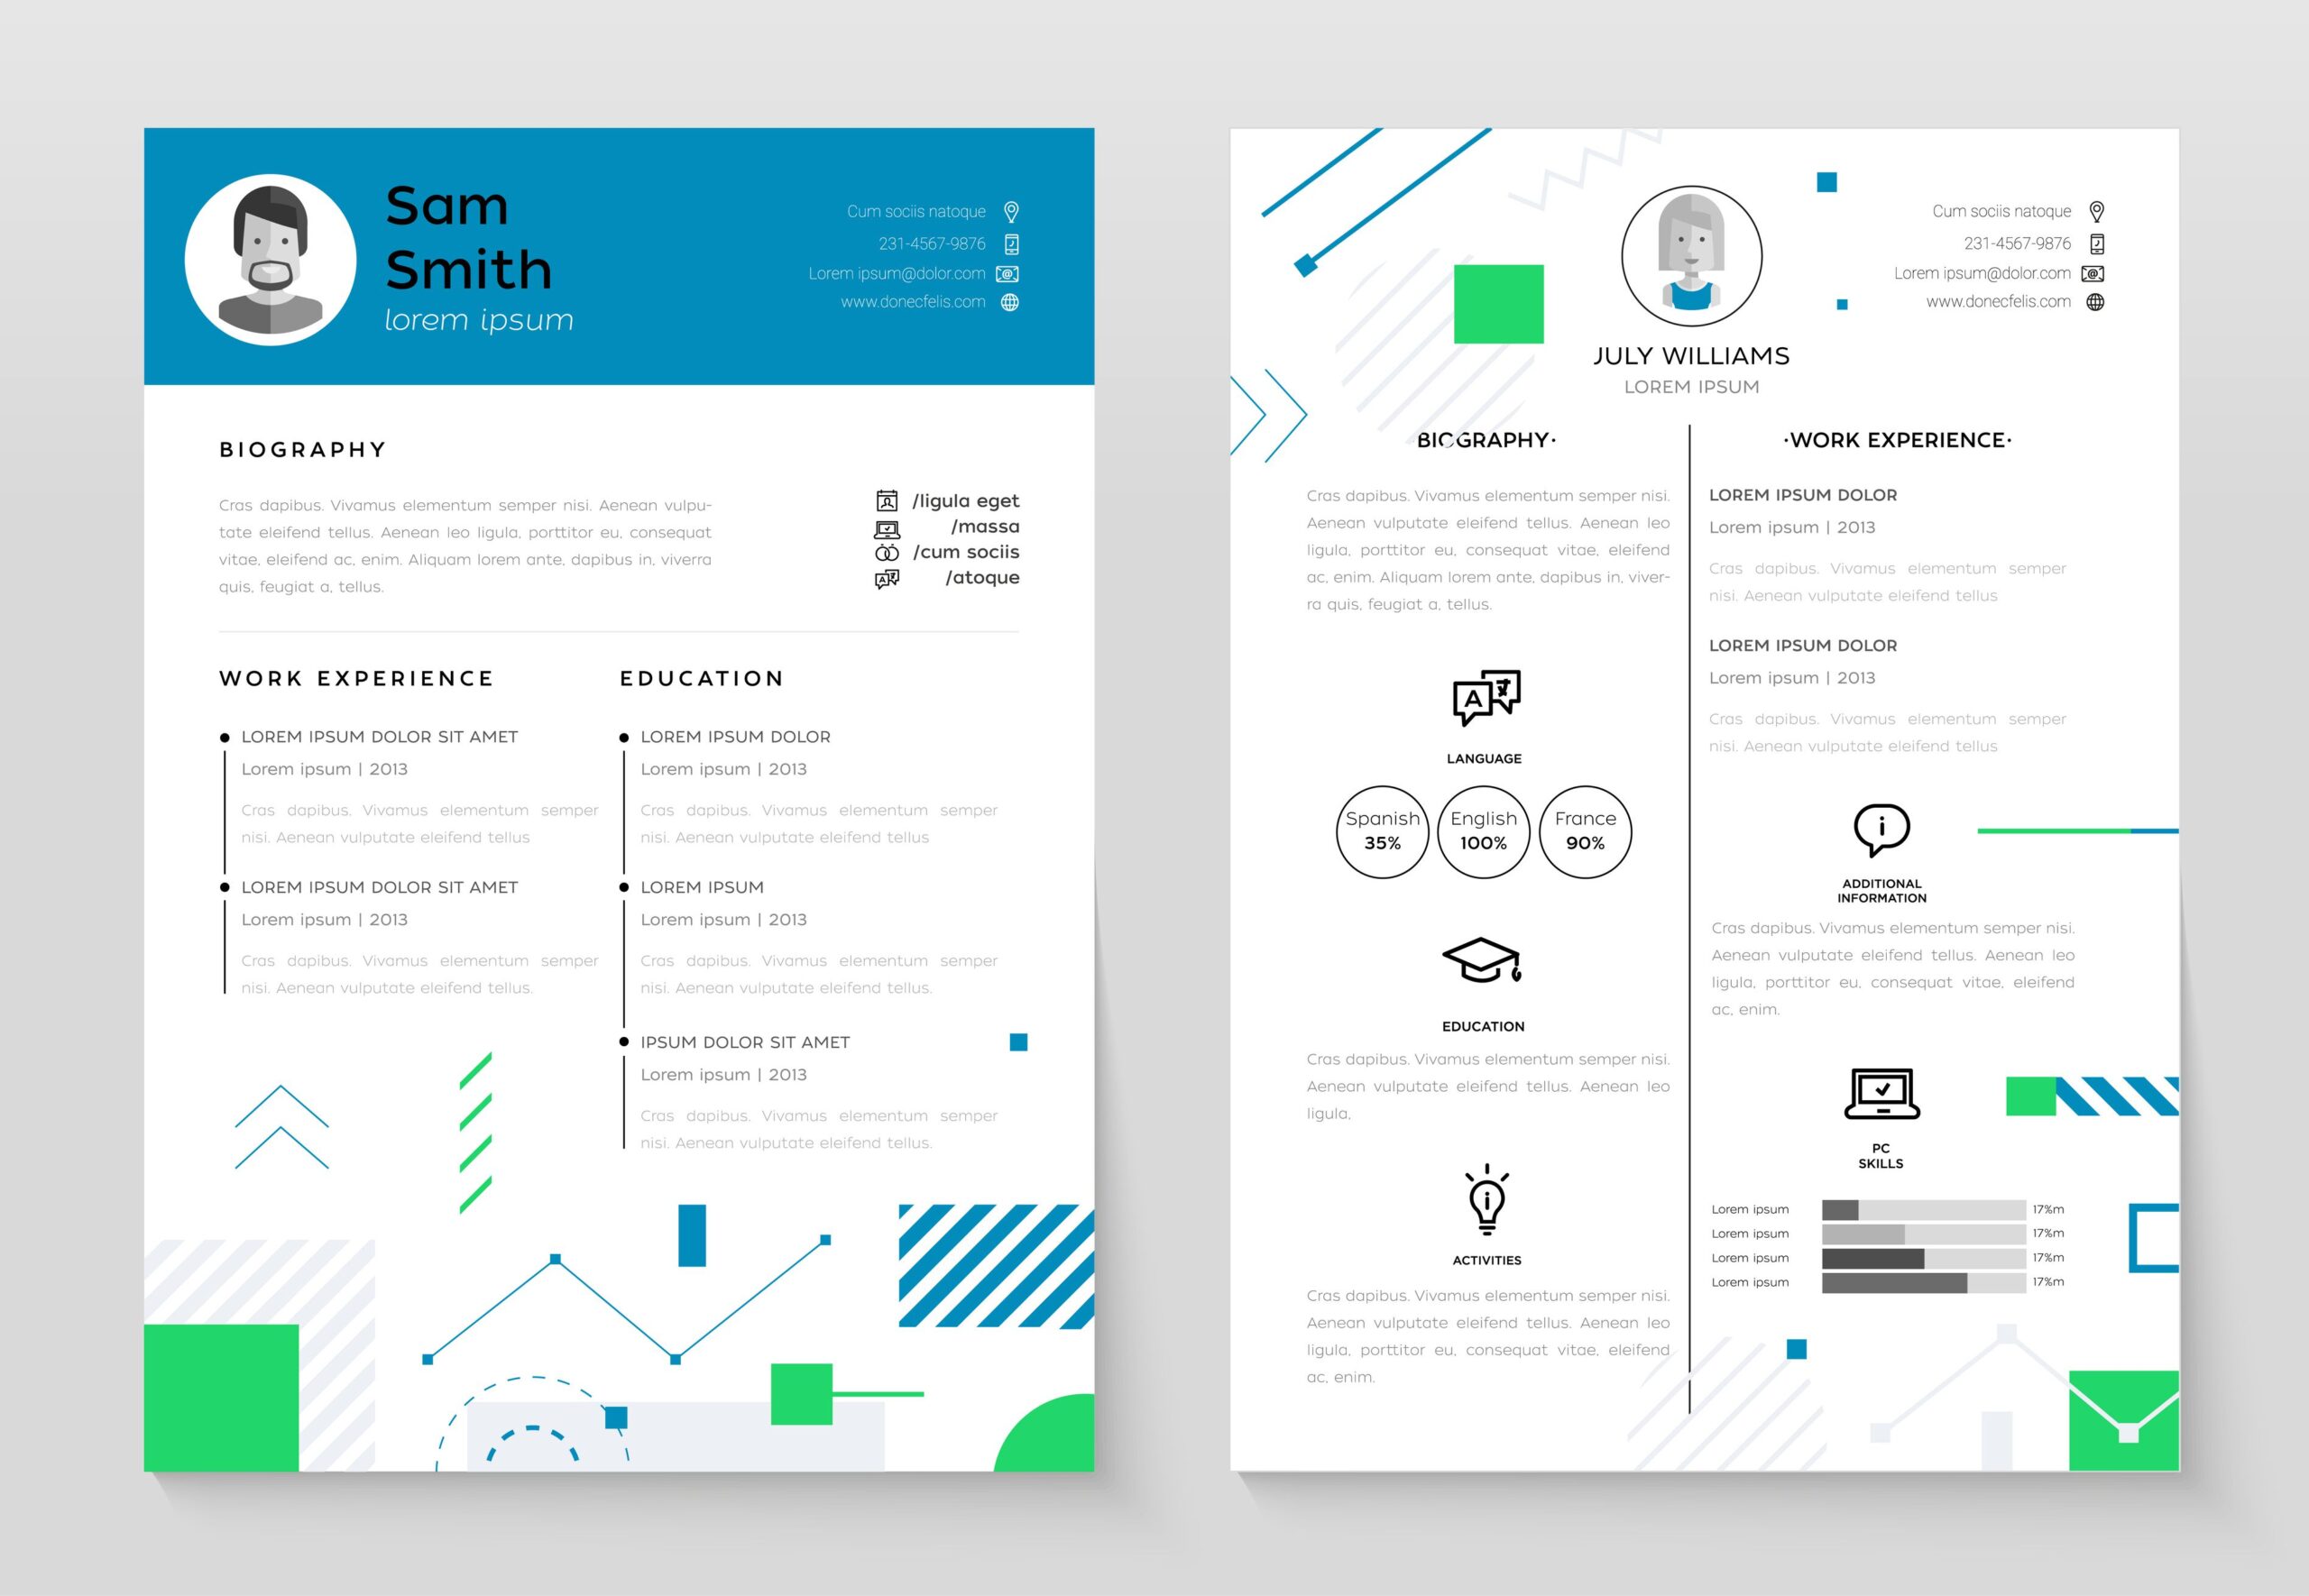 15 Amazing Infographic Resumes To Inspire You